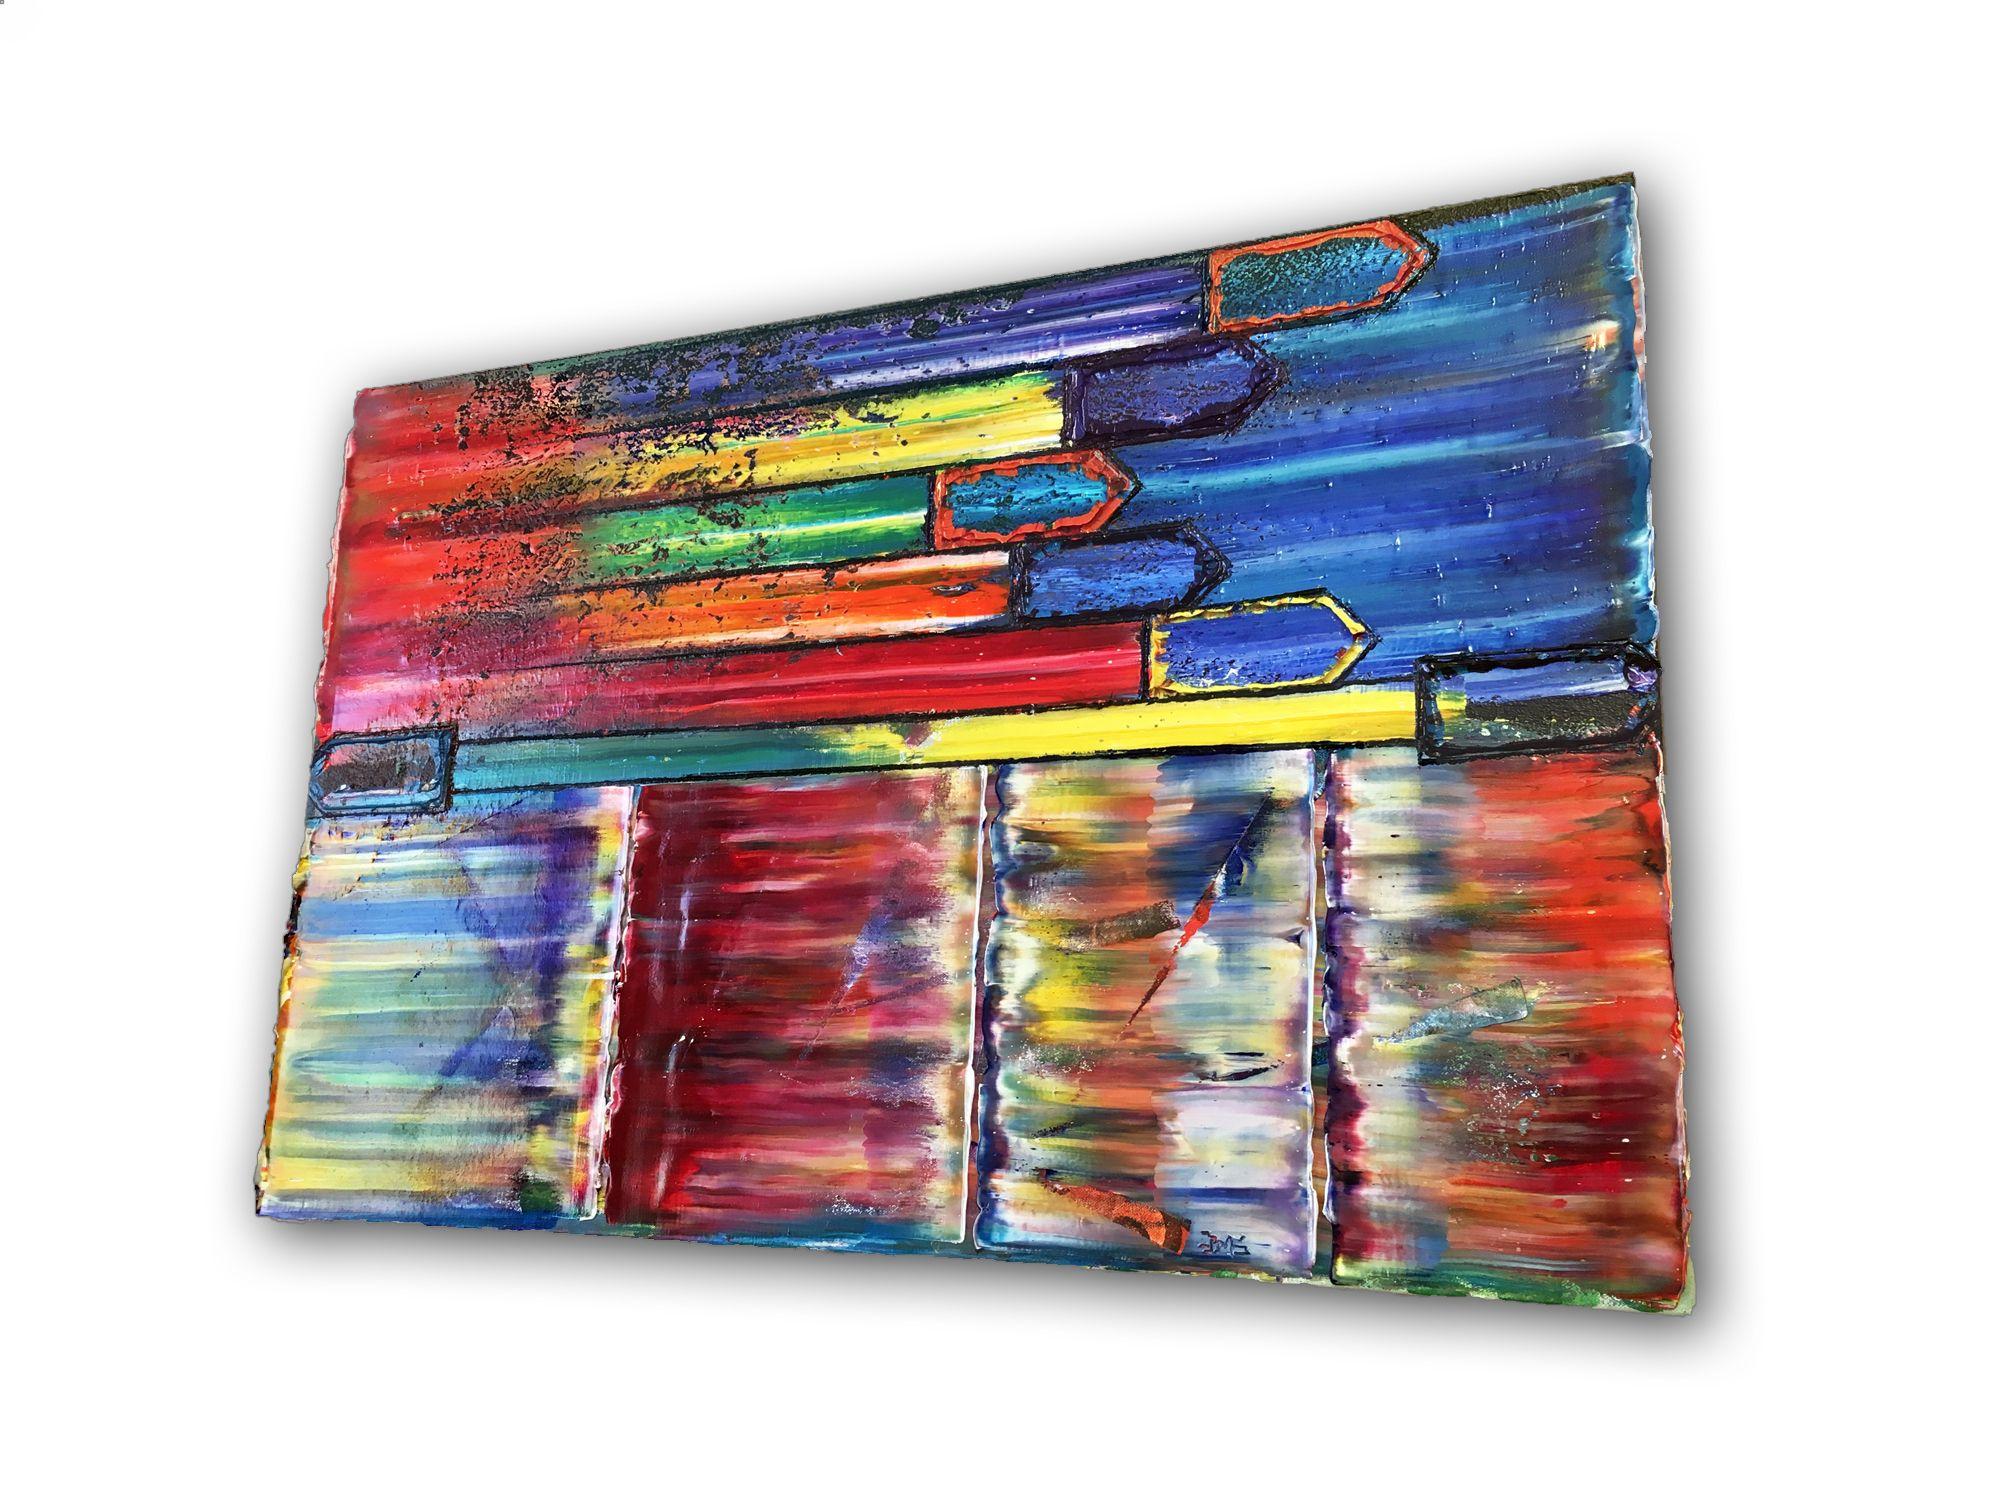 This is a unique and original PMS abstract oil painting and one of my personal favorites. It is part of a series of highly textured, semi-design oriented pieces on canvas. This painting has huge sweeping, streaking, and textured color that is